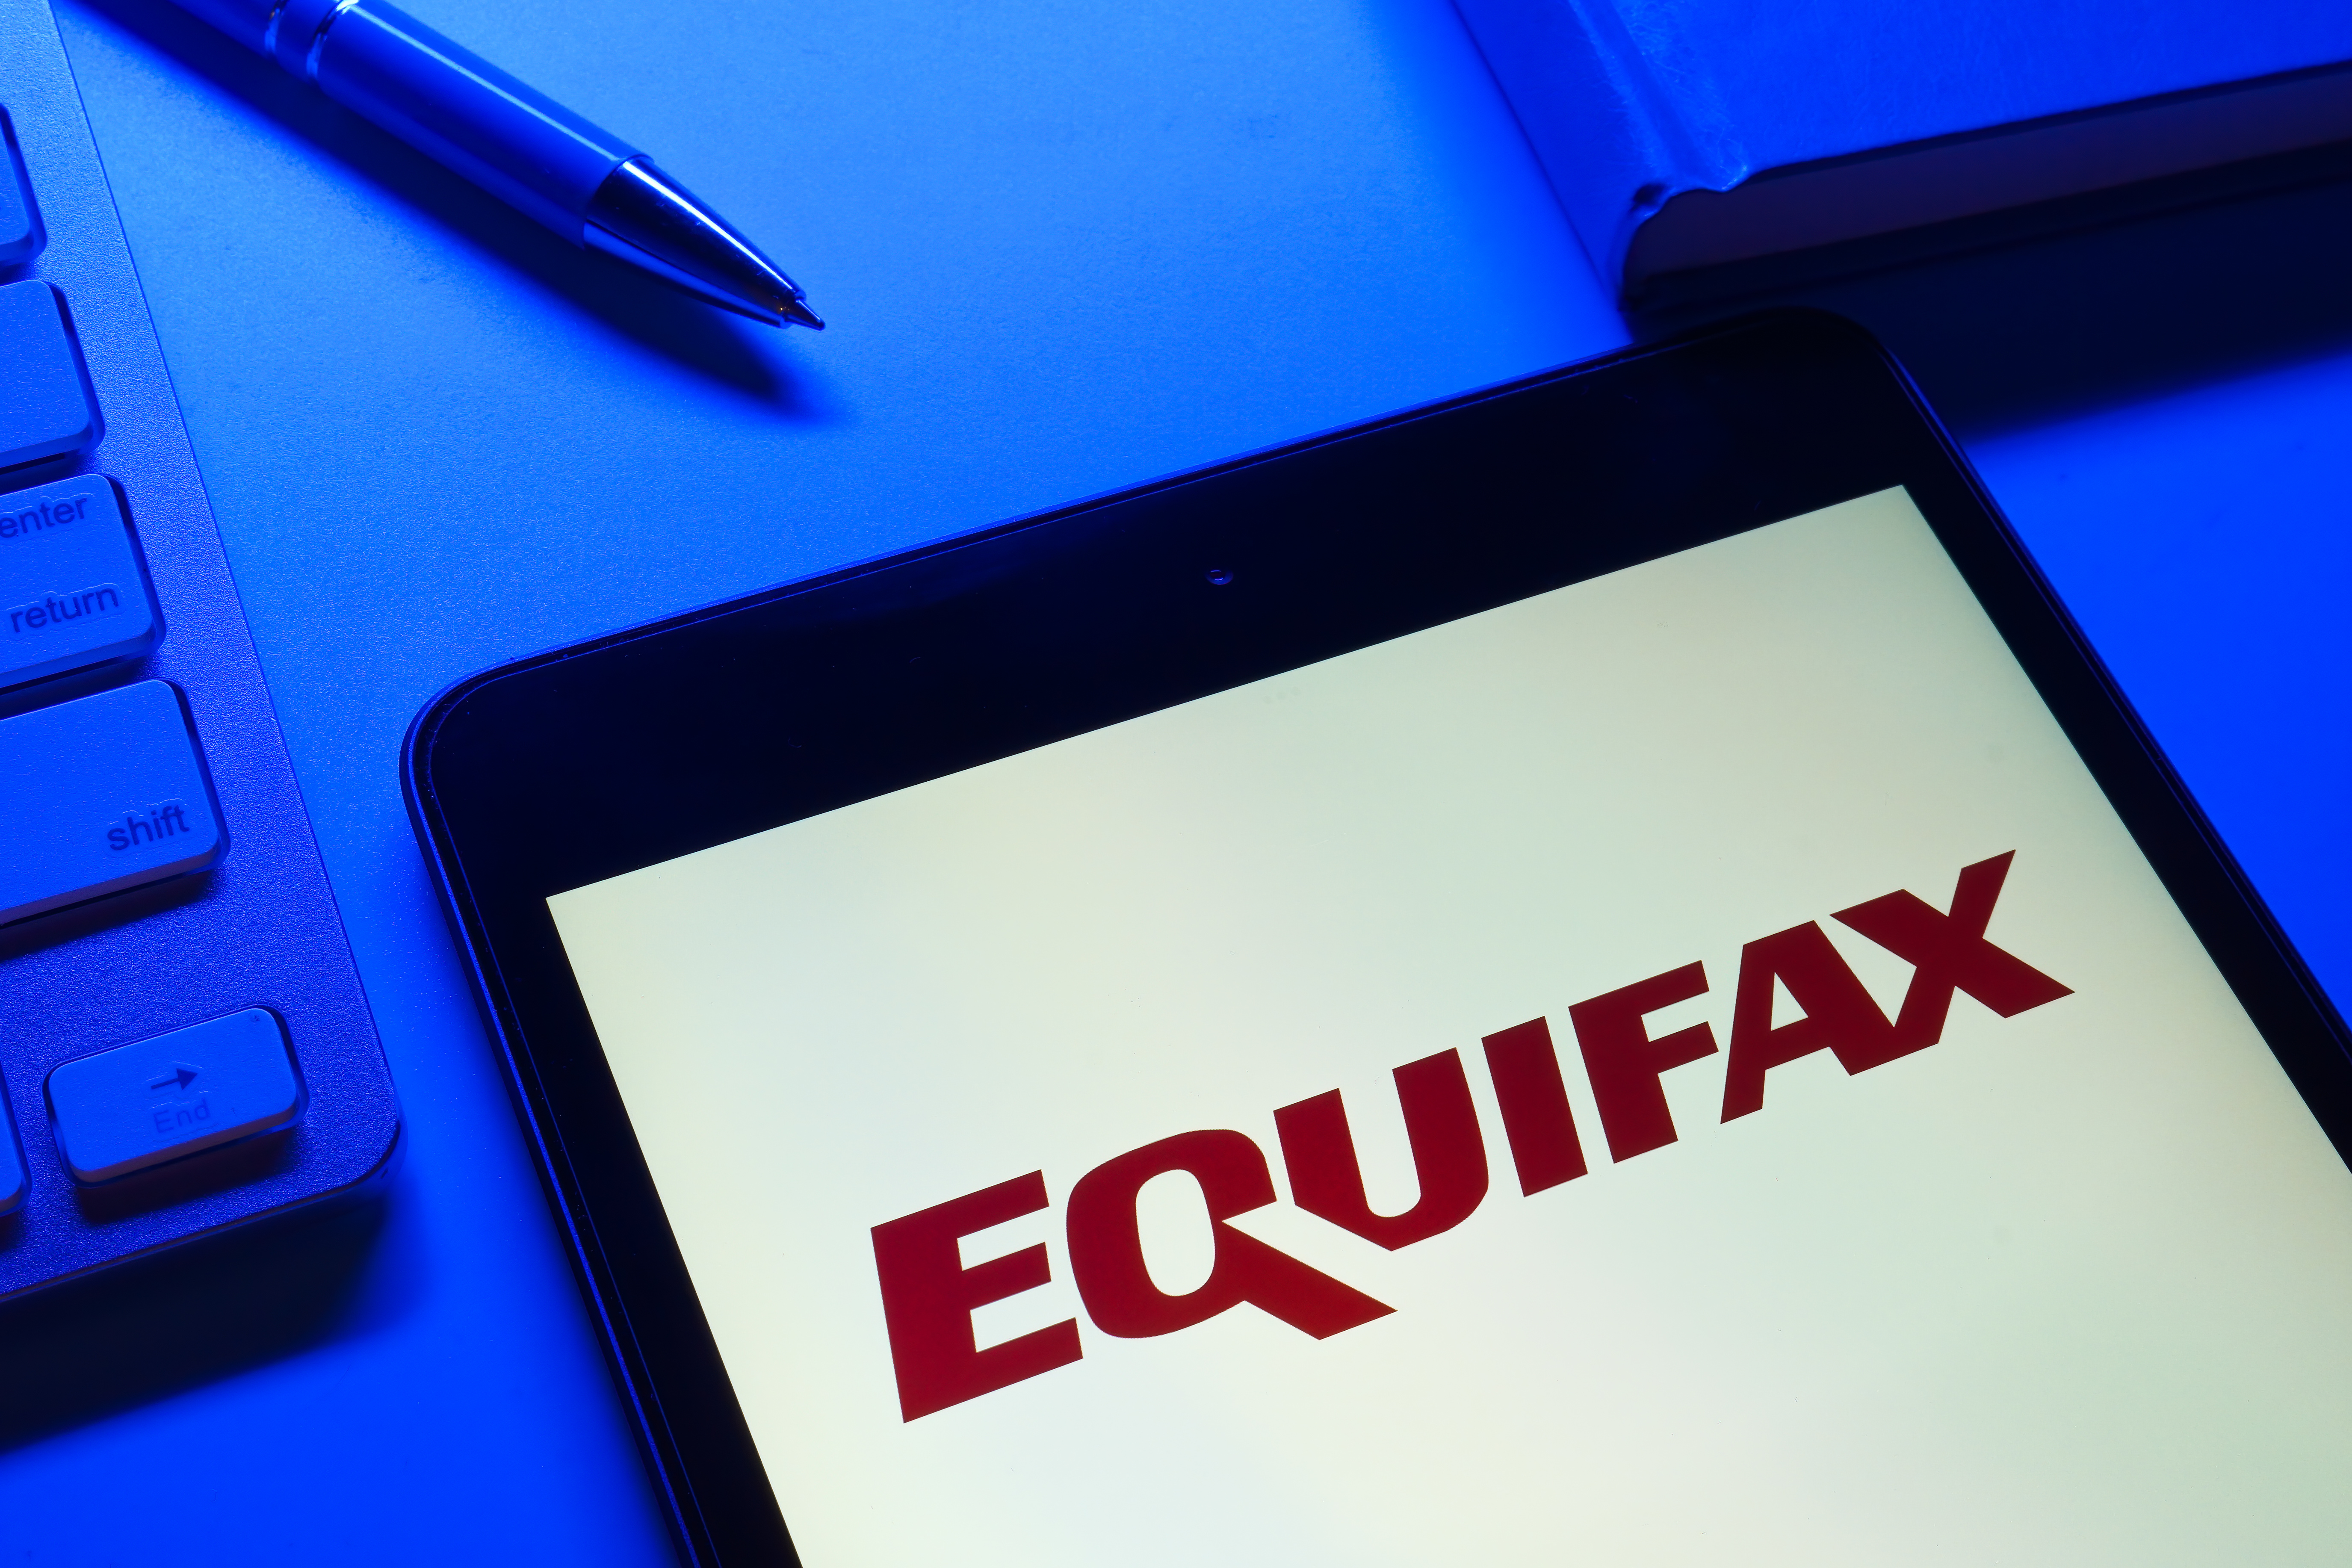 equifax review